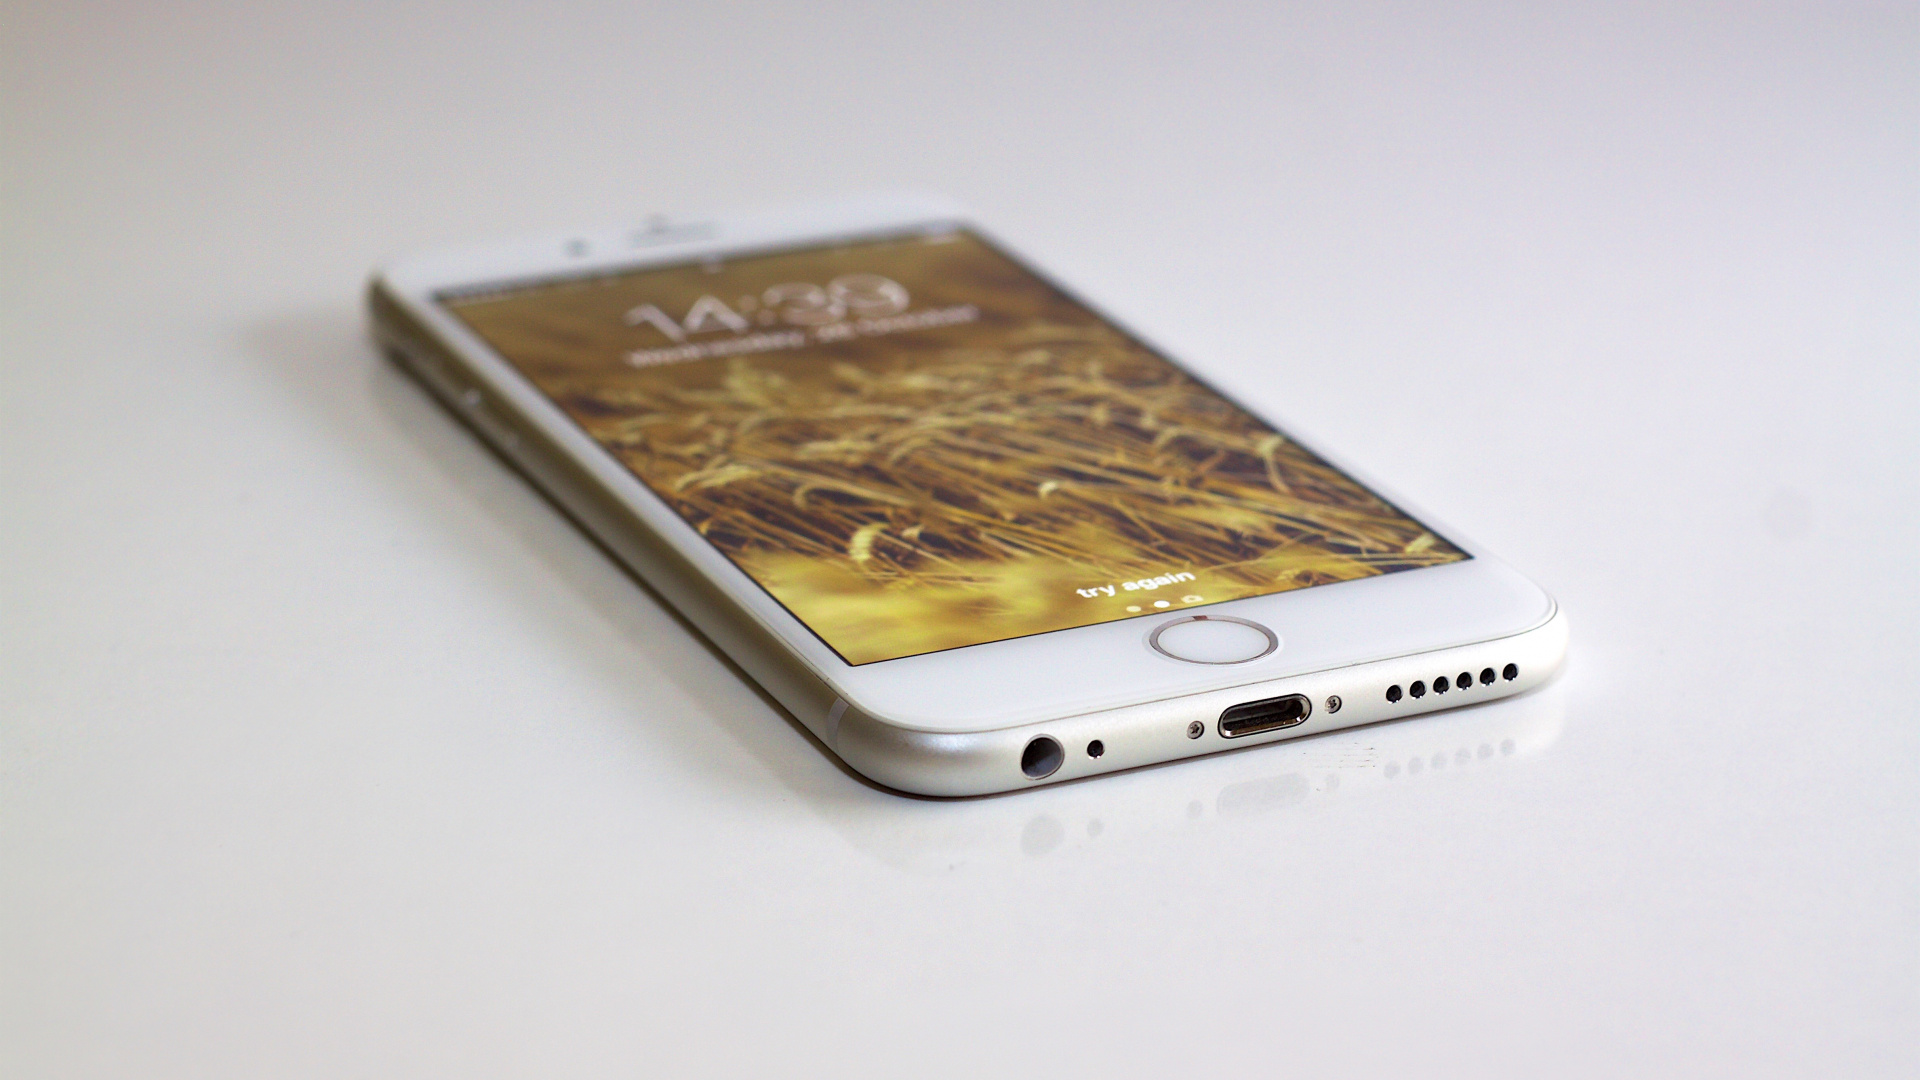 Gold Iphone 6 on White Table. Wallpaper in 1920x1080 Resolution